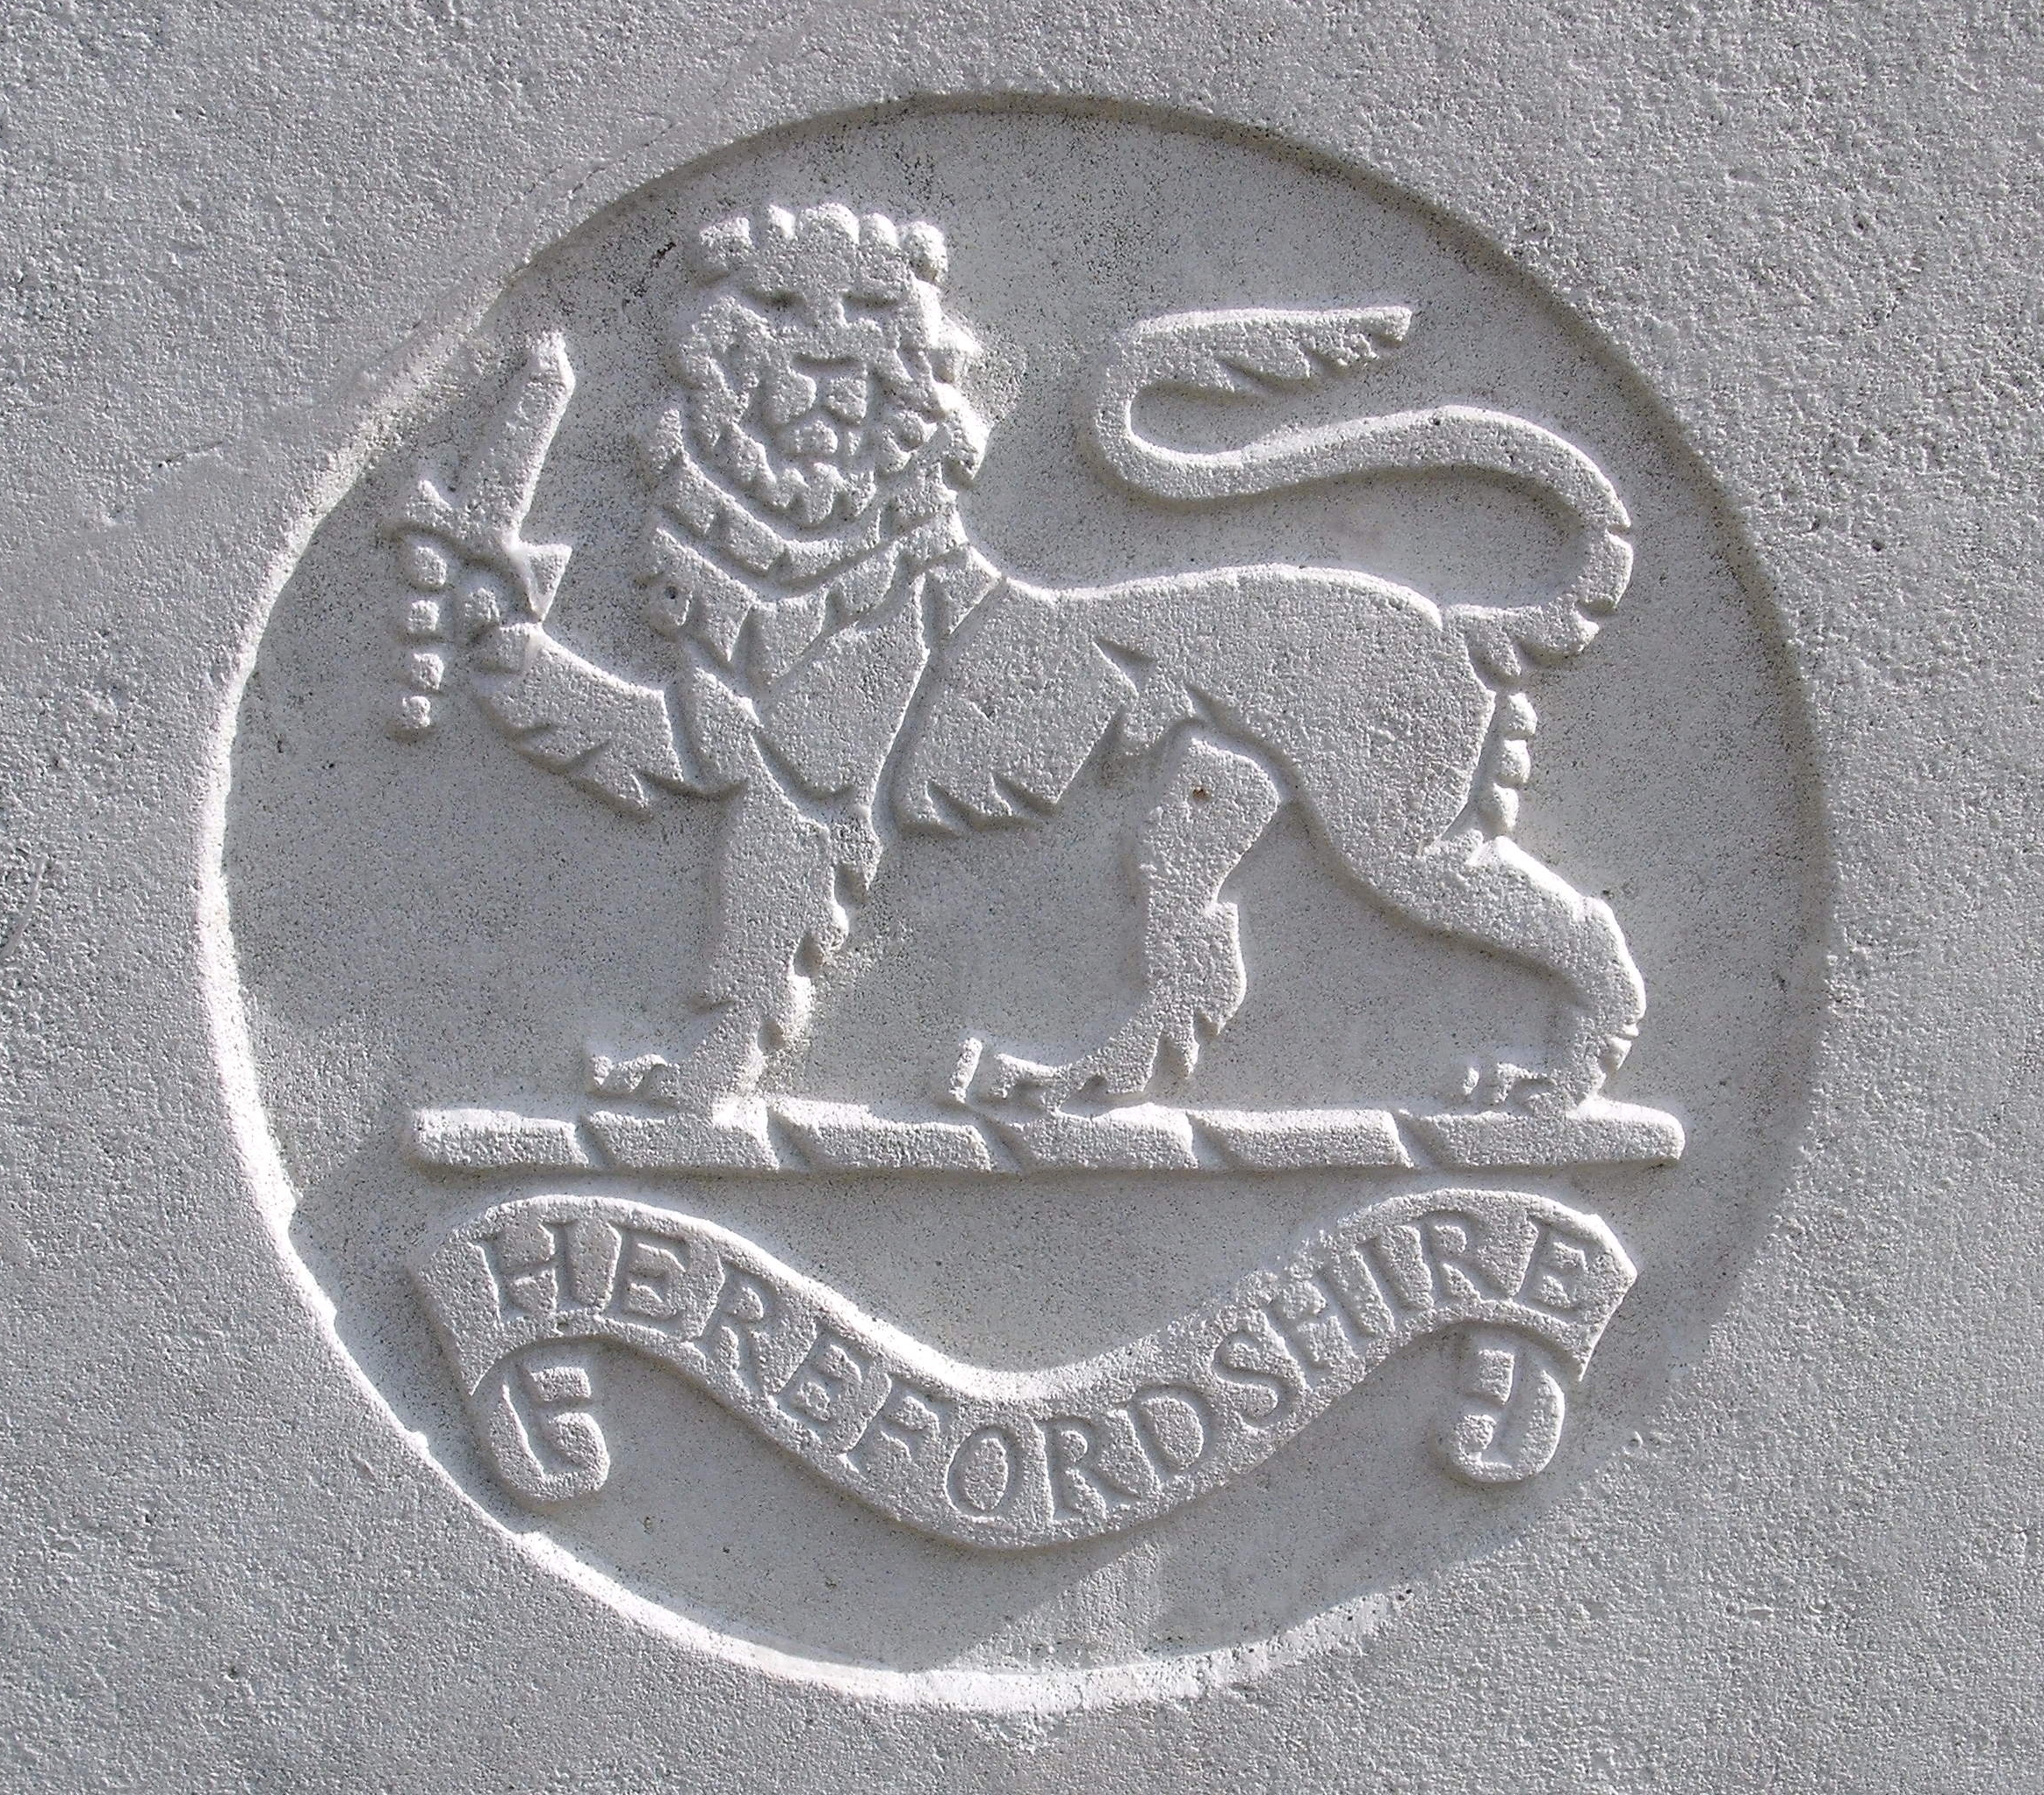 Capbadge of the Herefordshire Regiment